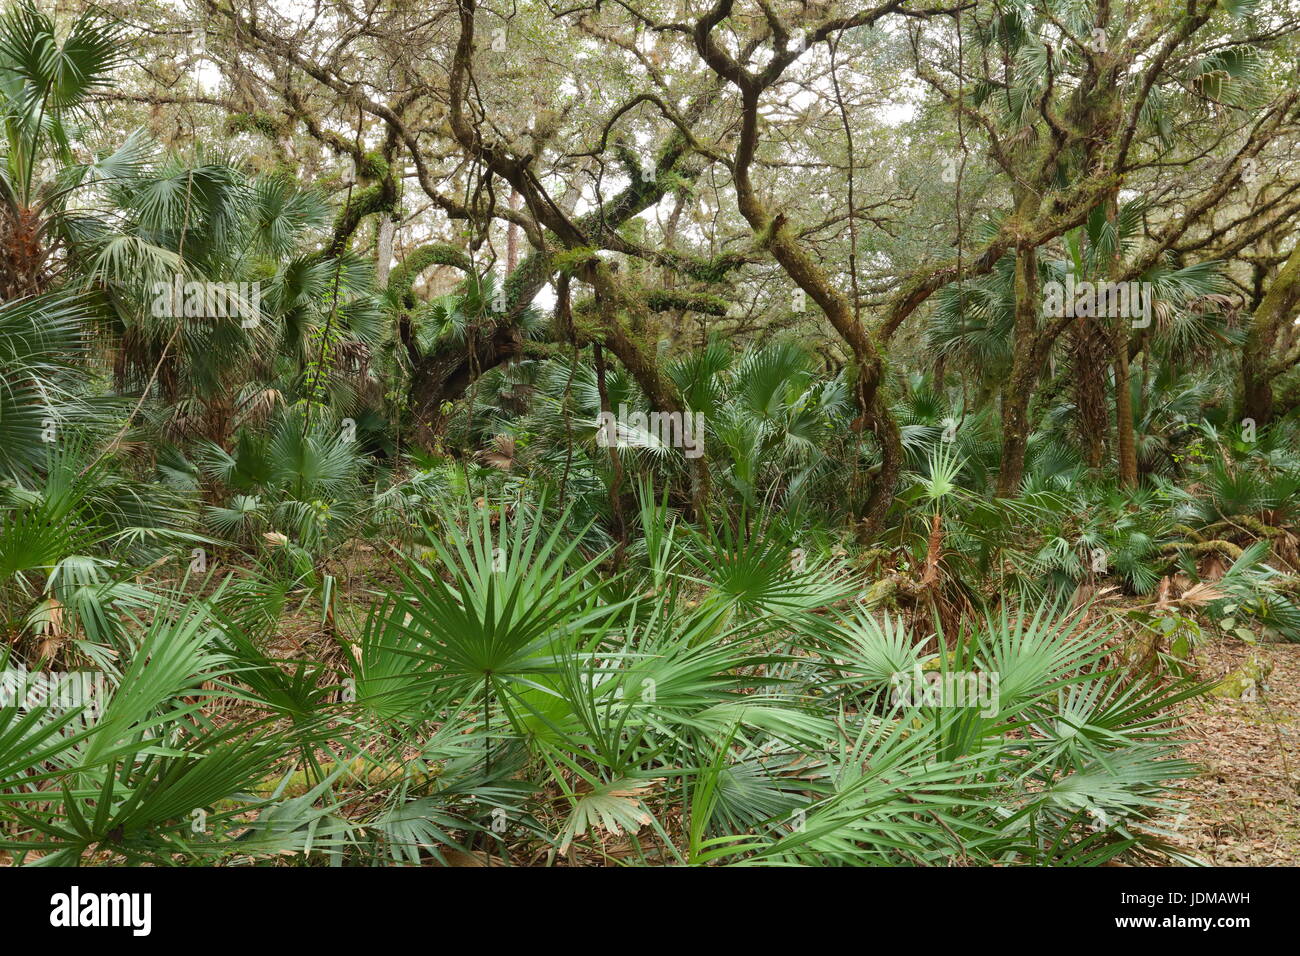 Live oak trees with saw palmetto in the understory. Stock Photo